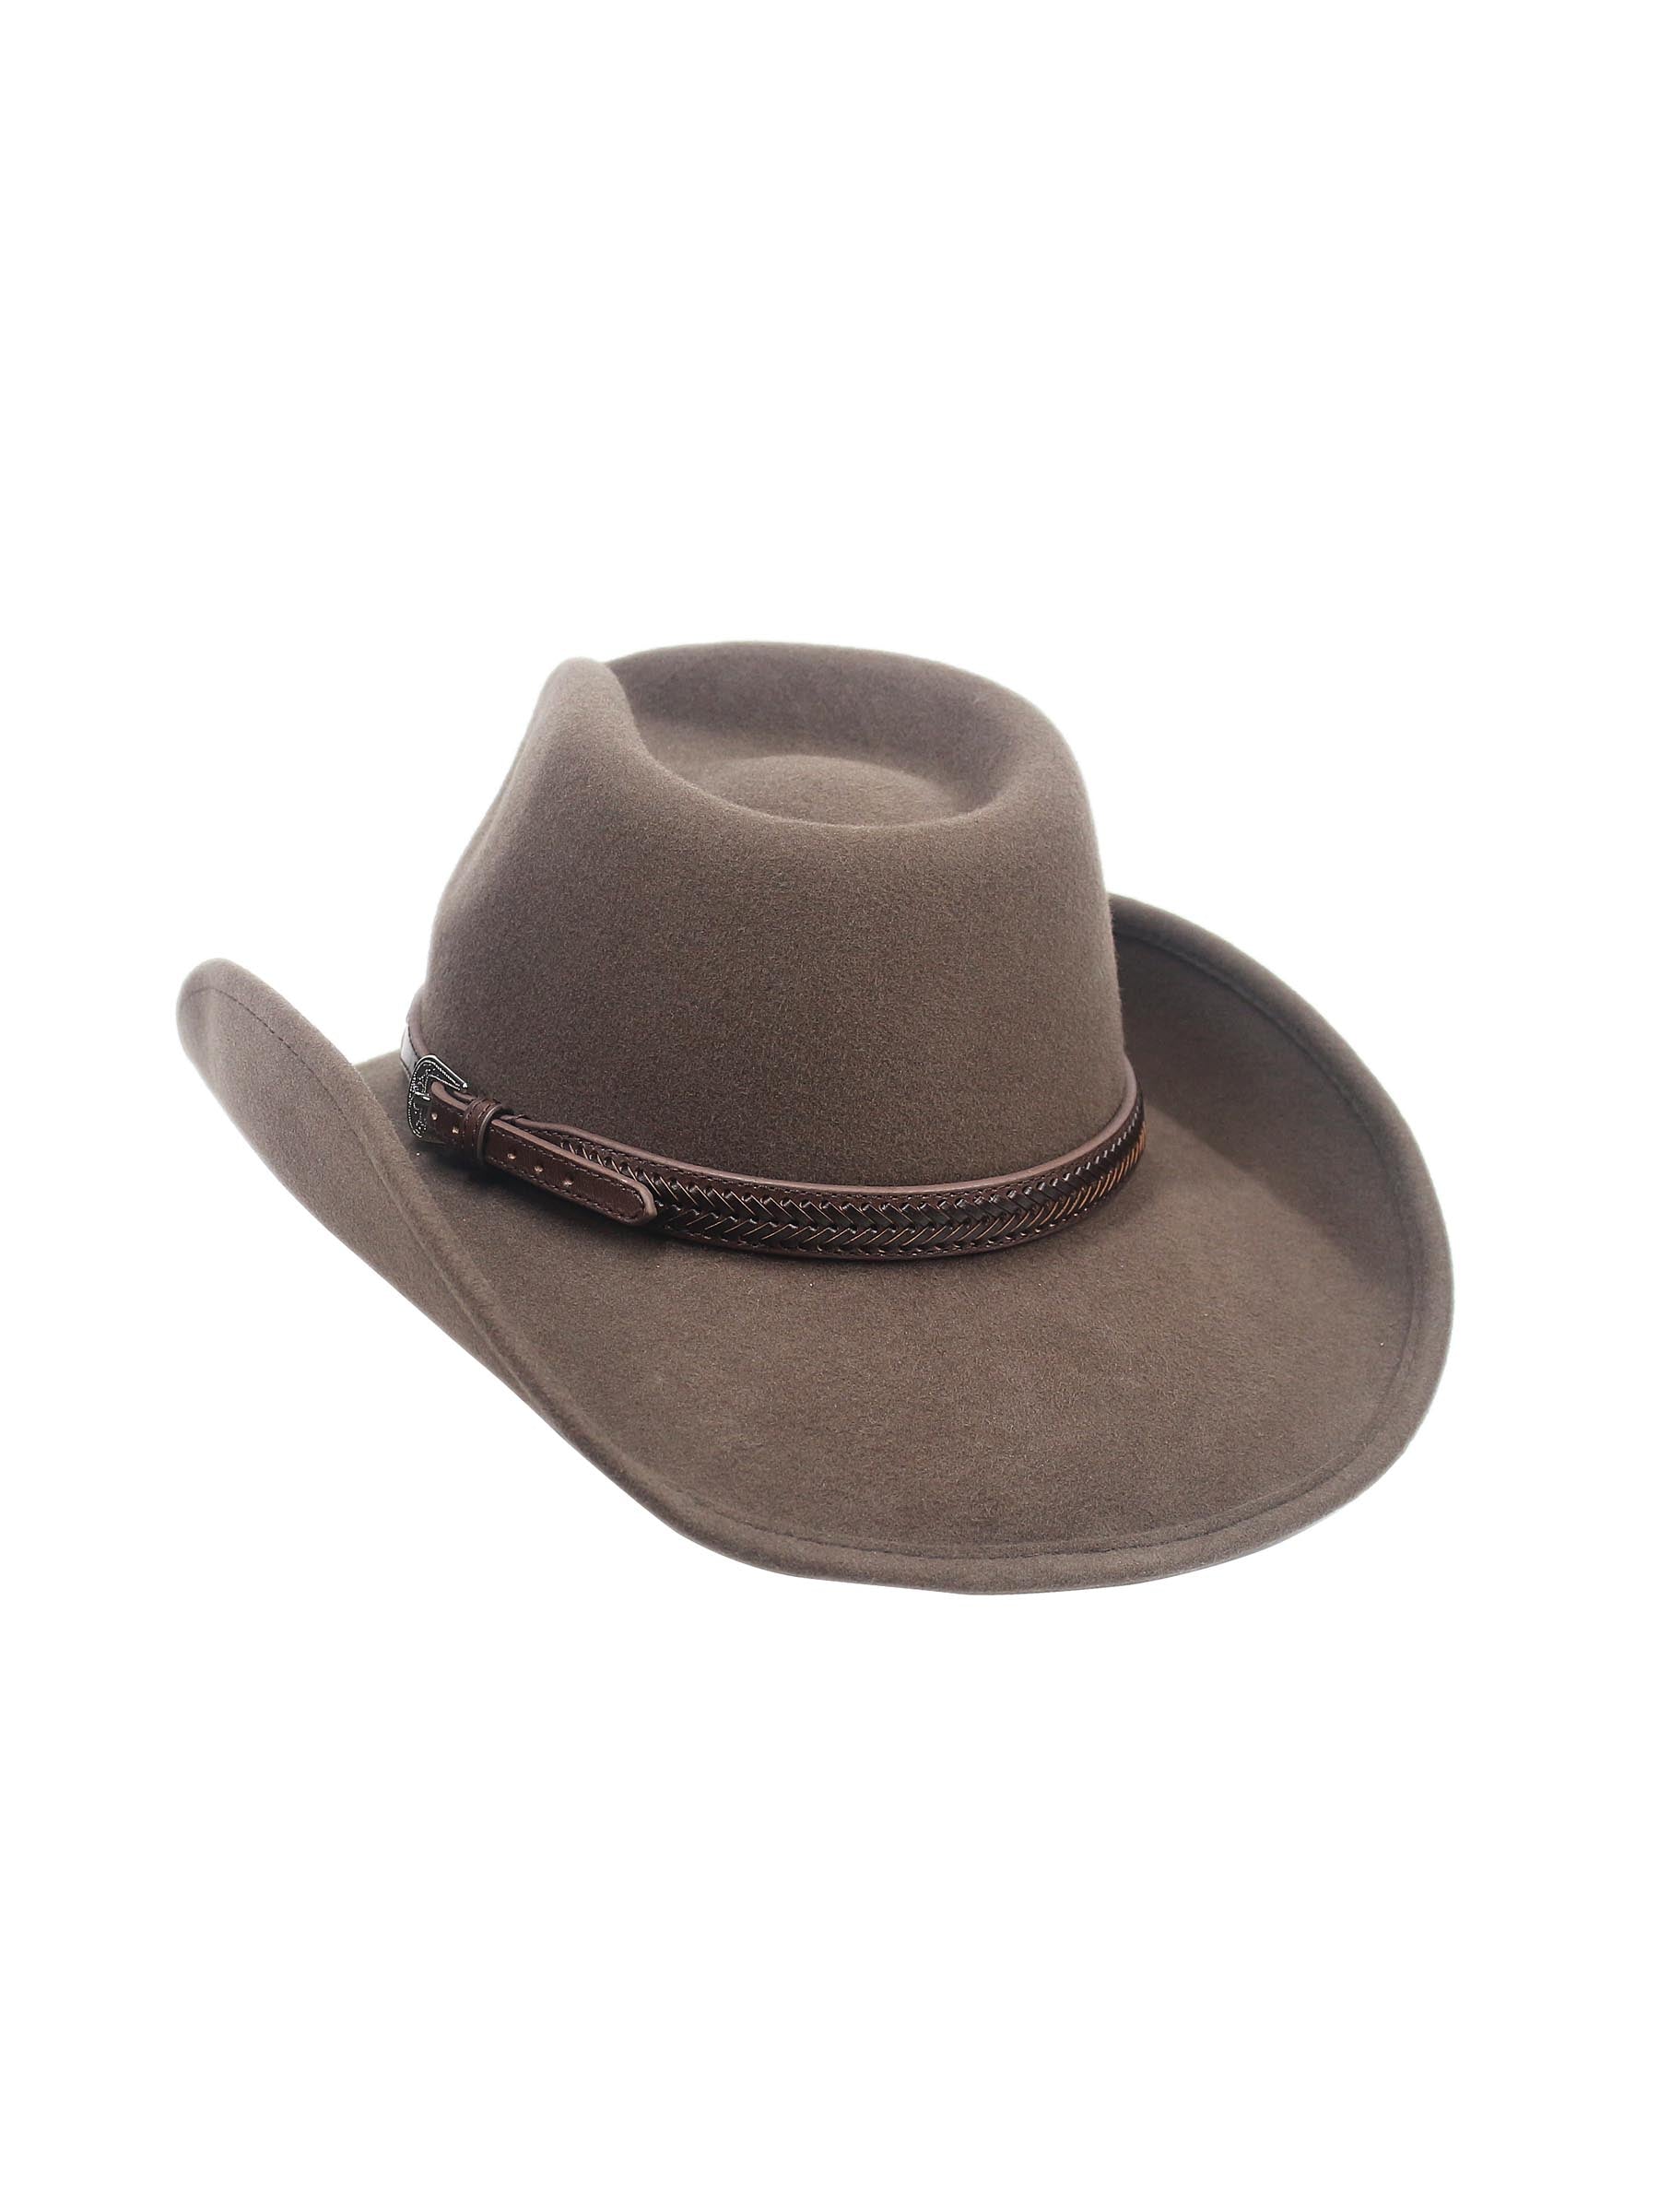 Western Hat Band for Cowboy Hats by Silver Canyon, Brown Leather with –  Silver Canyon Boot and Clothing Company